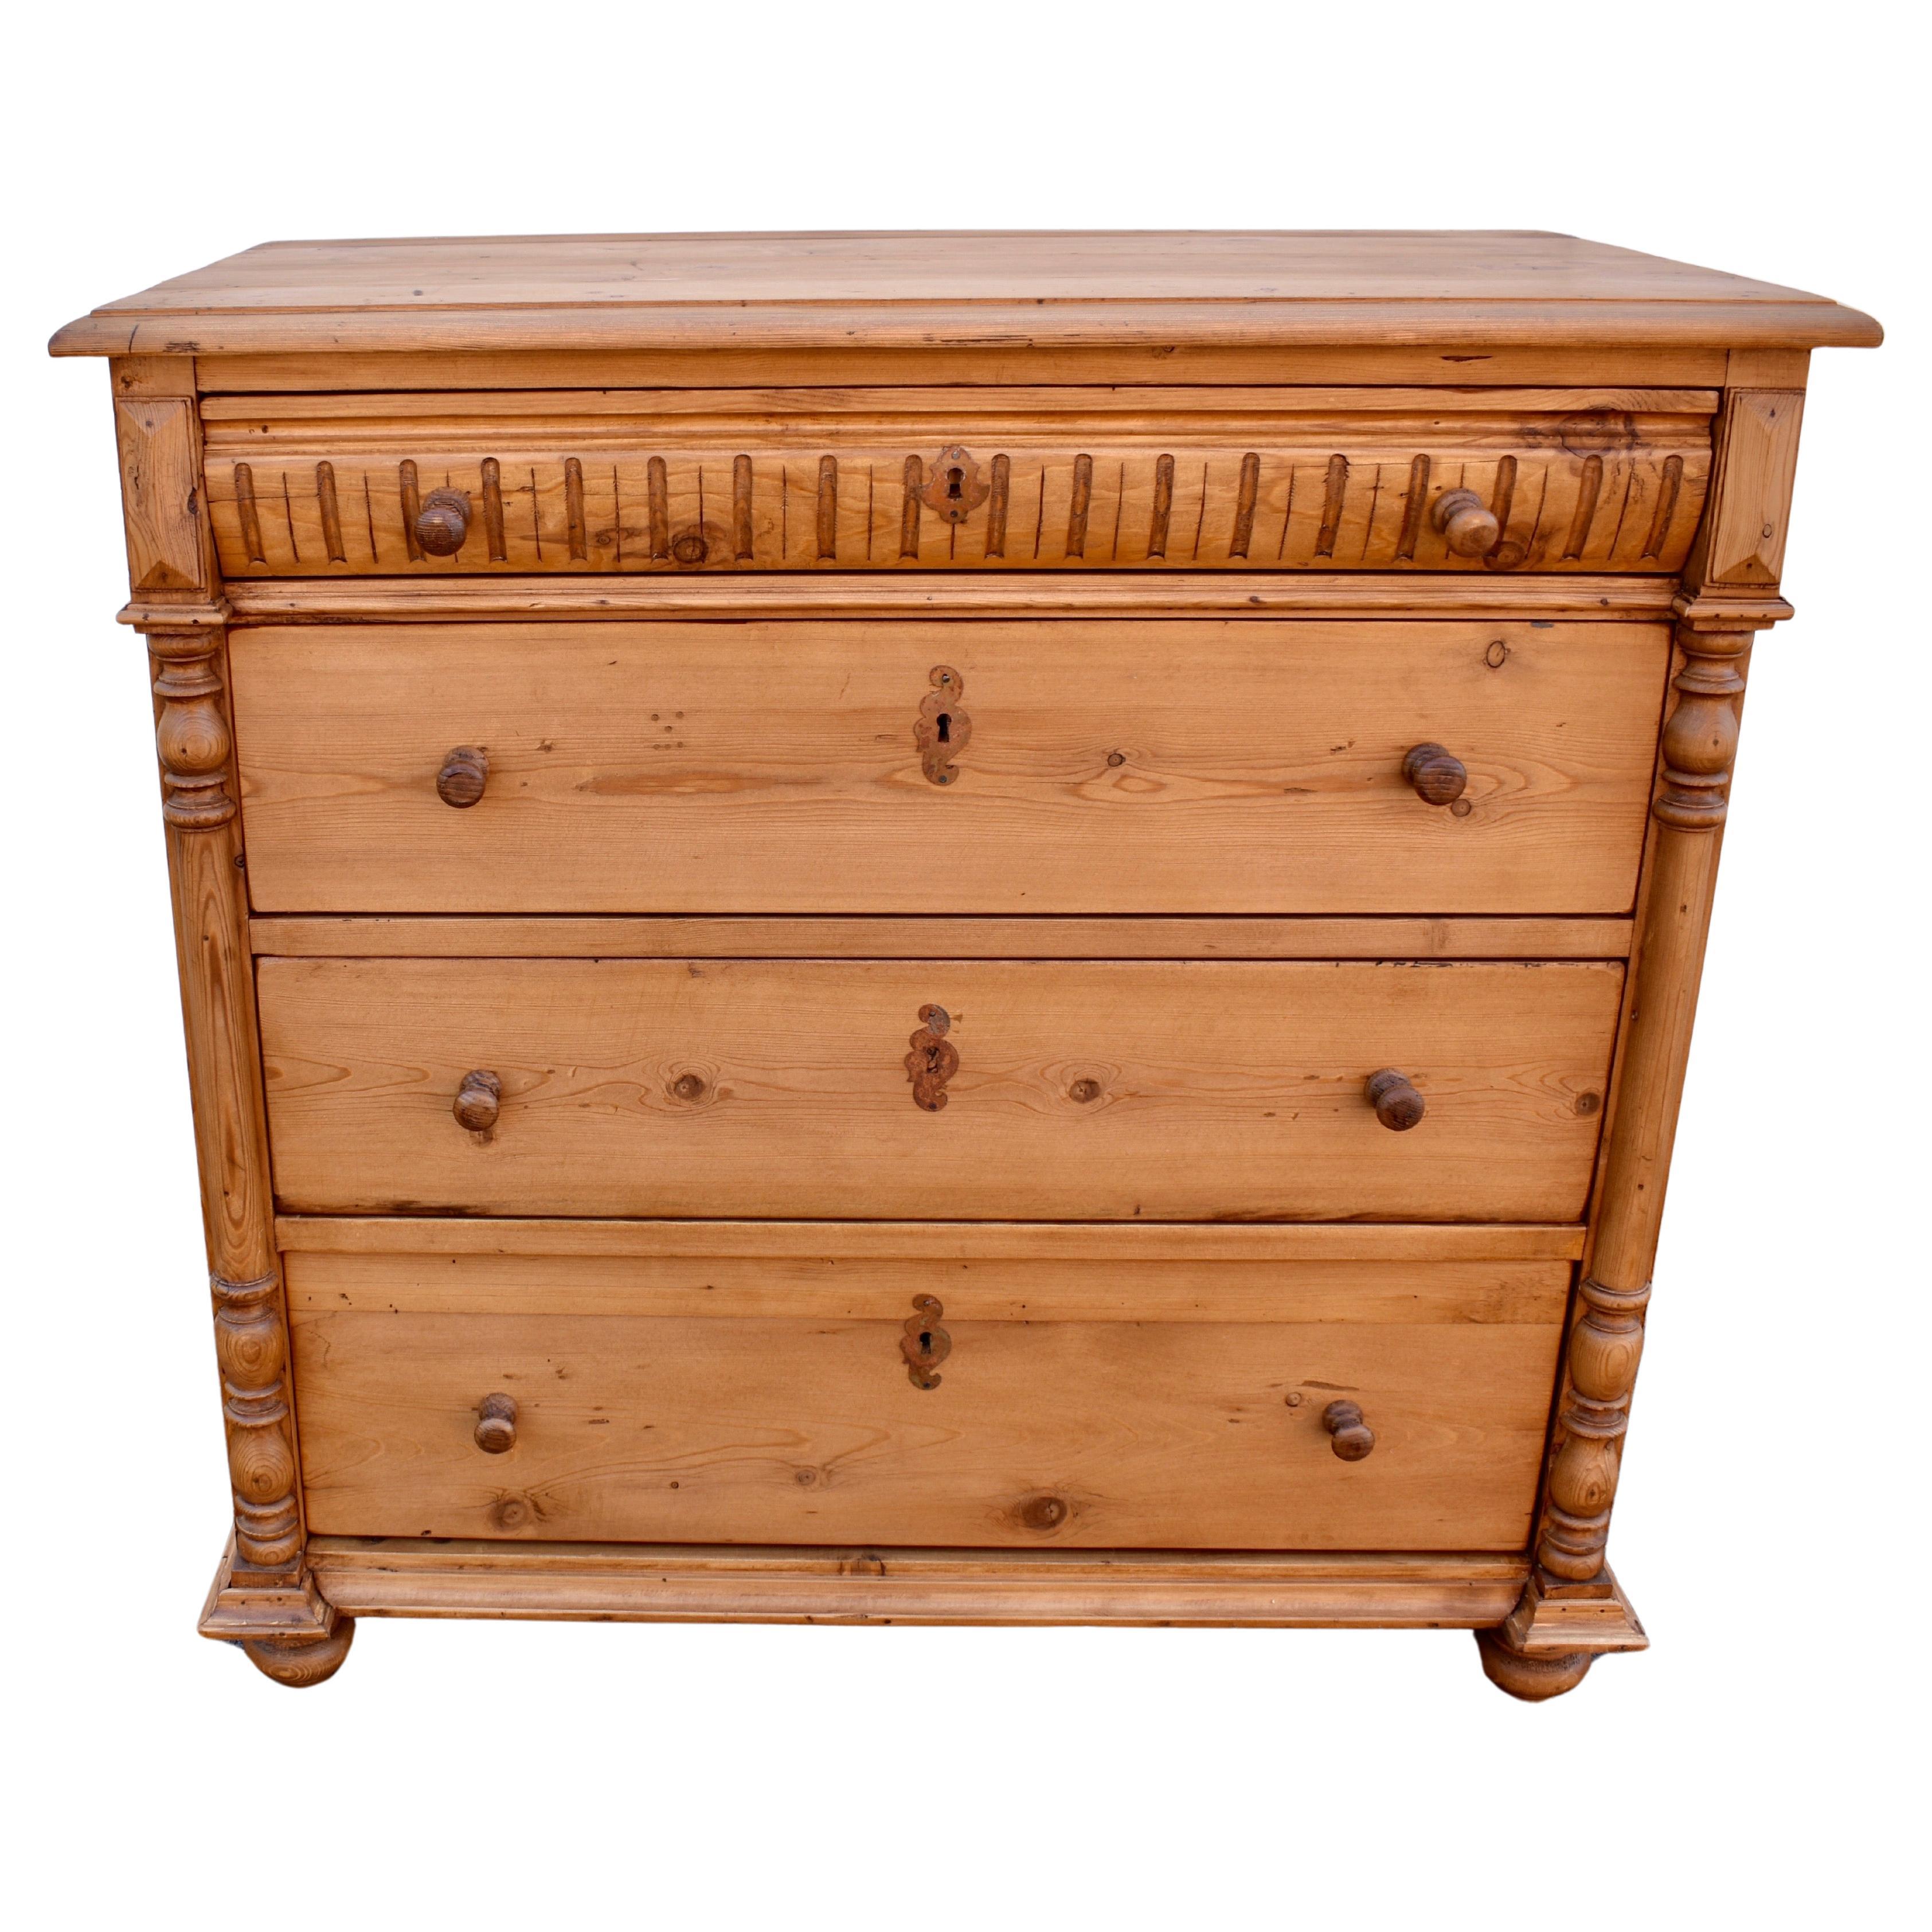 Pine Chest of Four Drawers